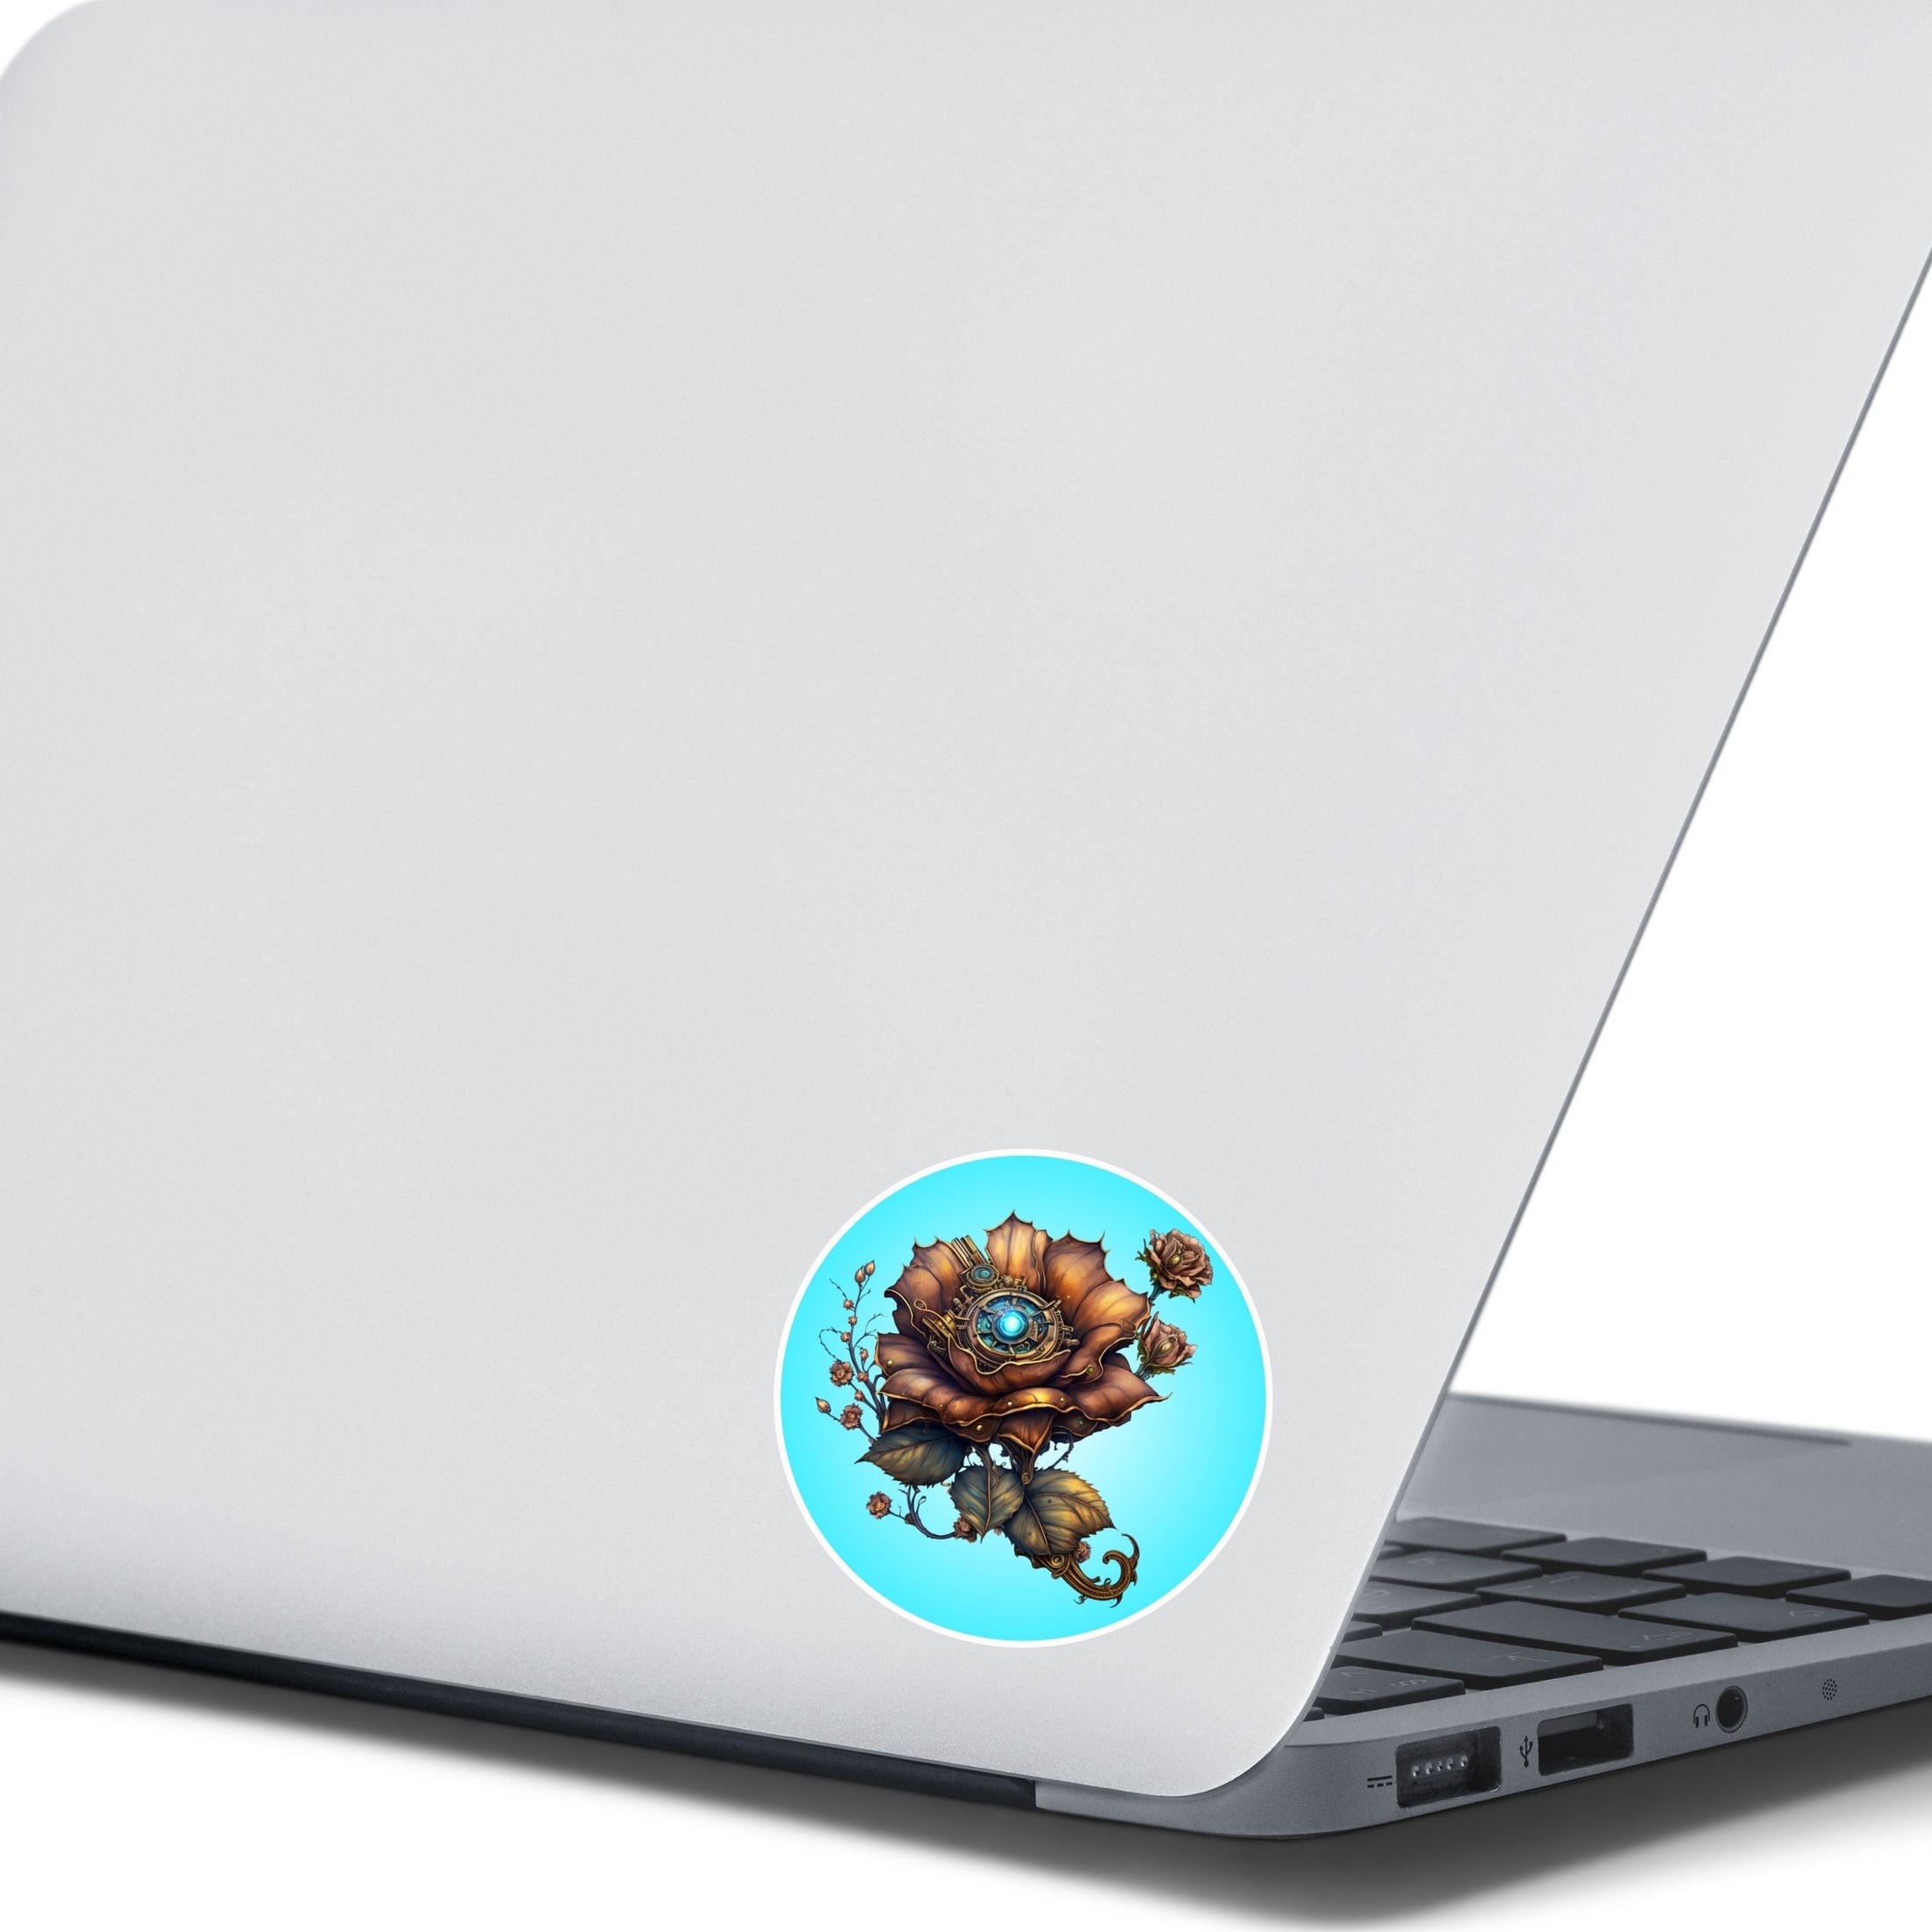 This image shows a steampunk bronzed flower sticker on the back of an open laptop.